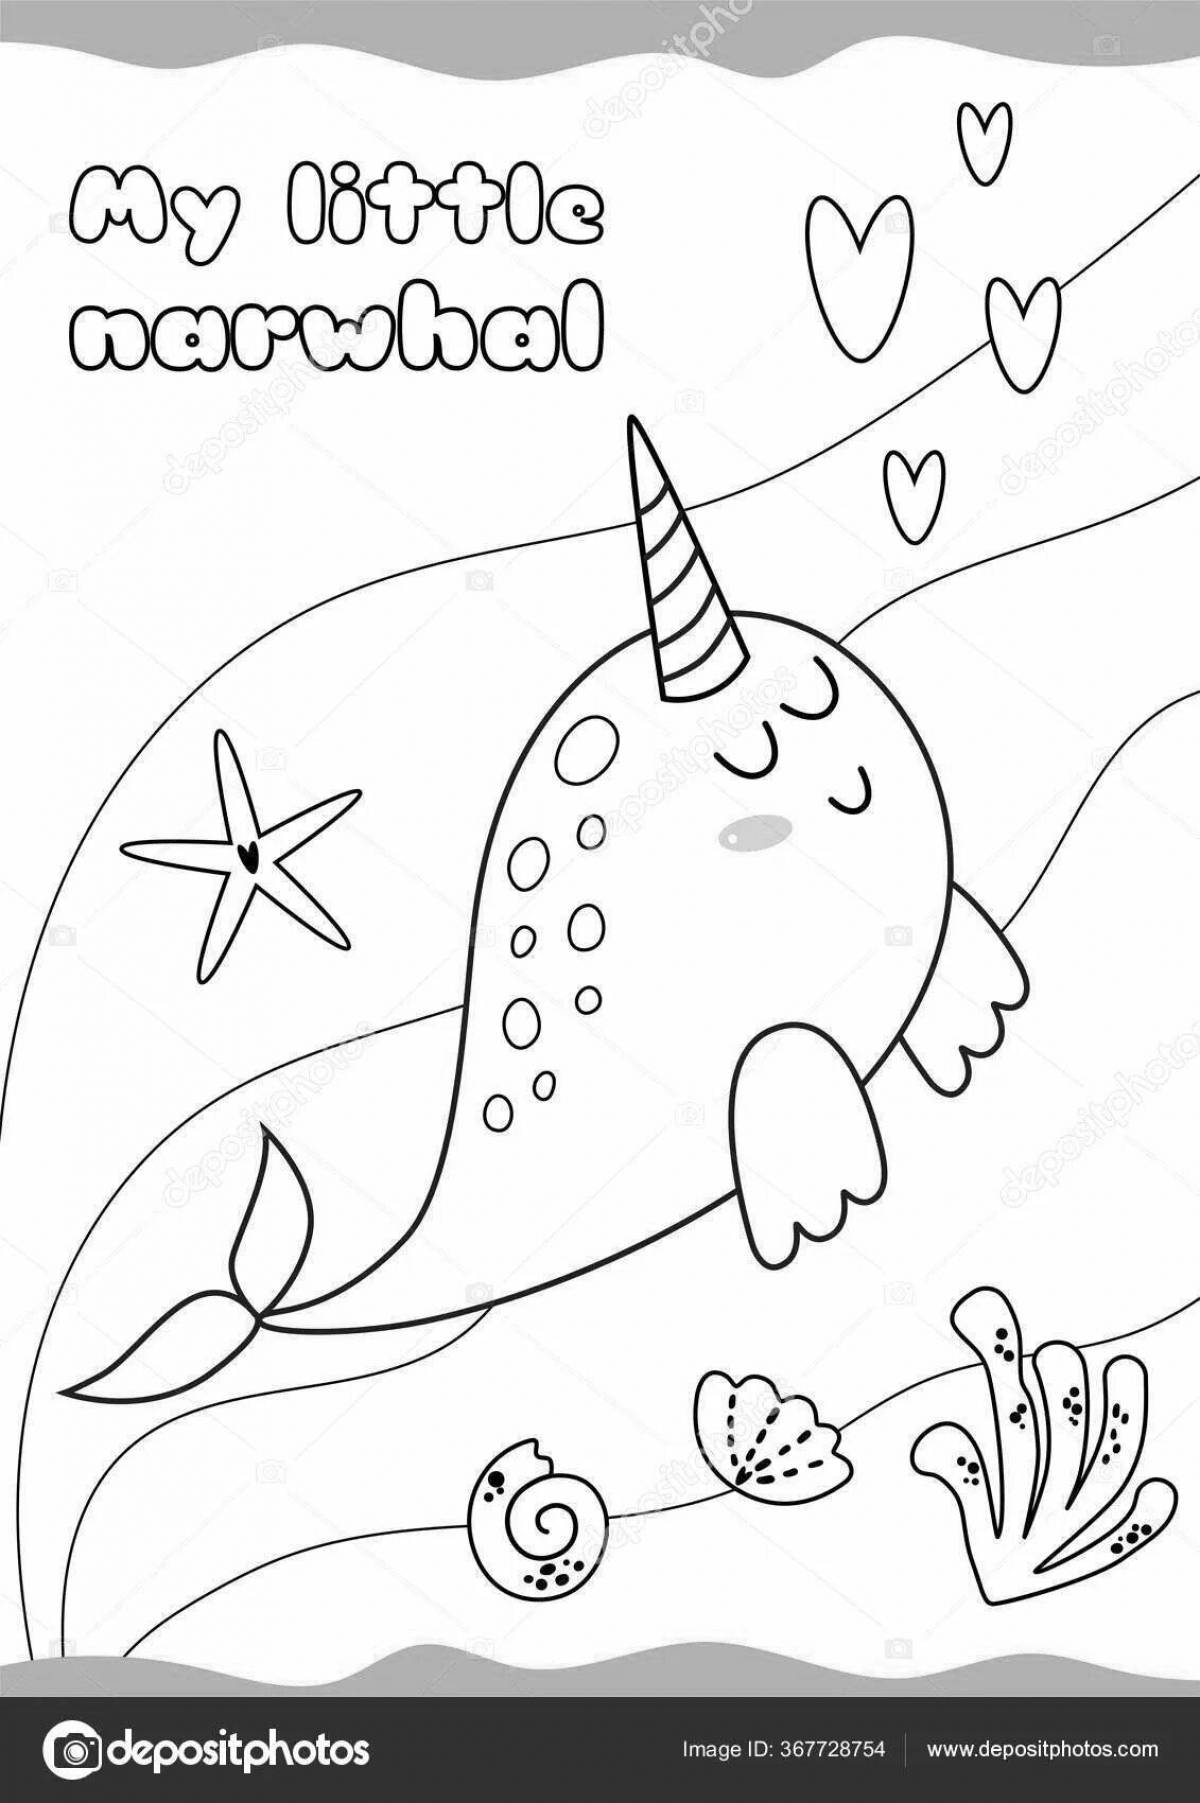 Gorgeous narwhal coloring book for kids